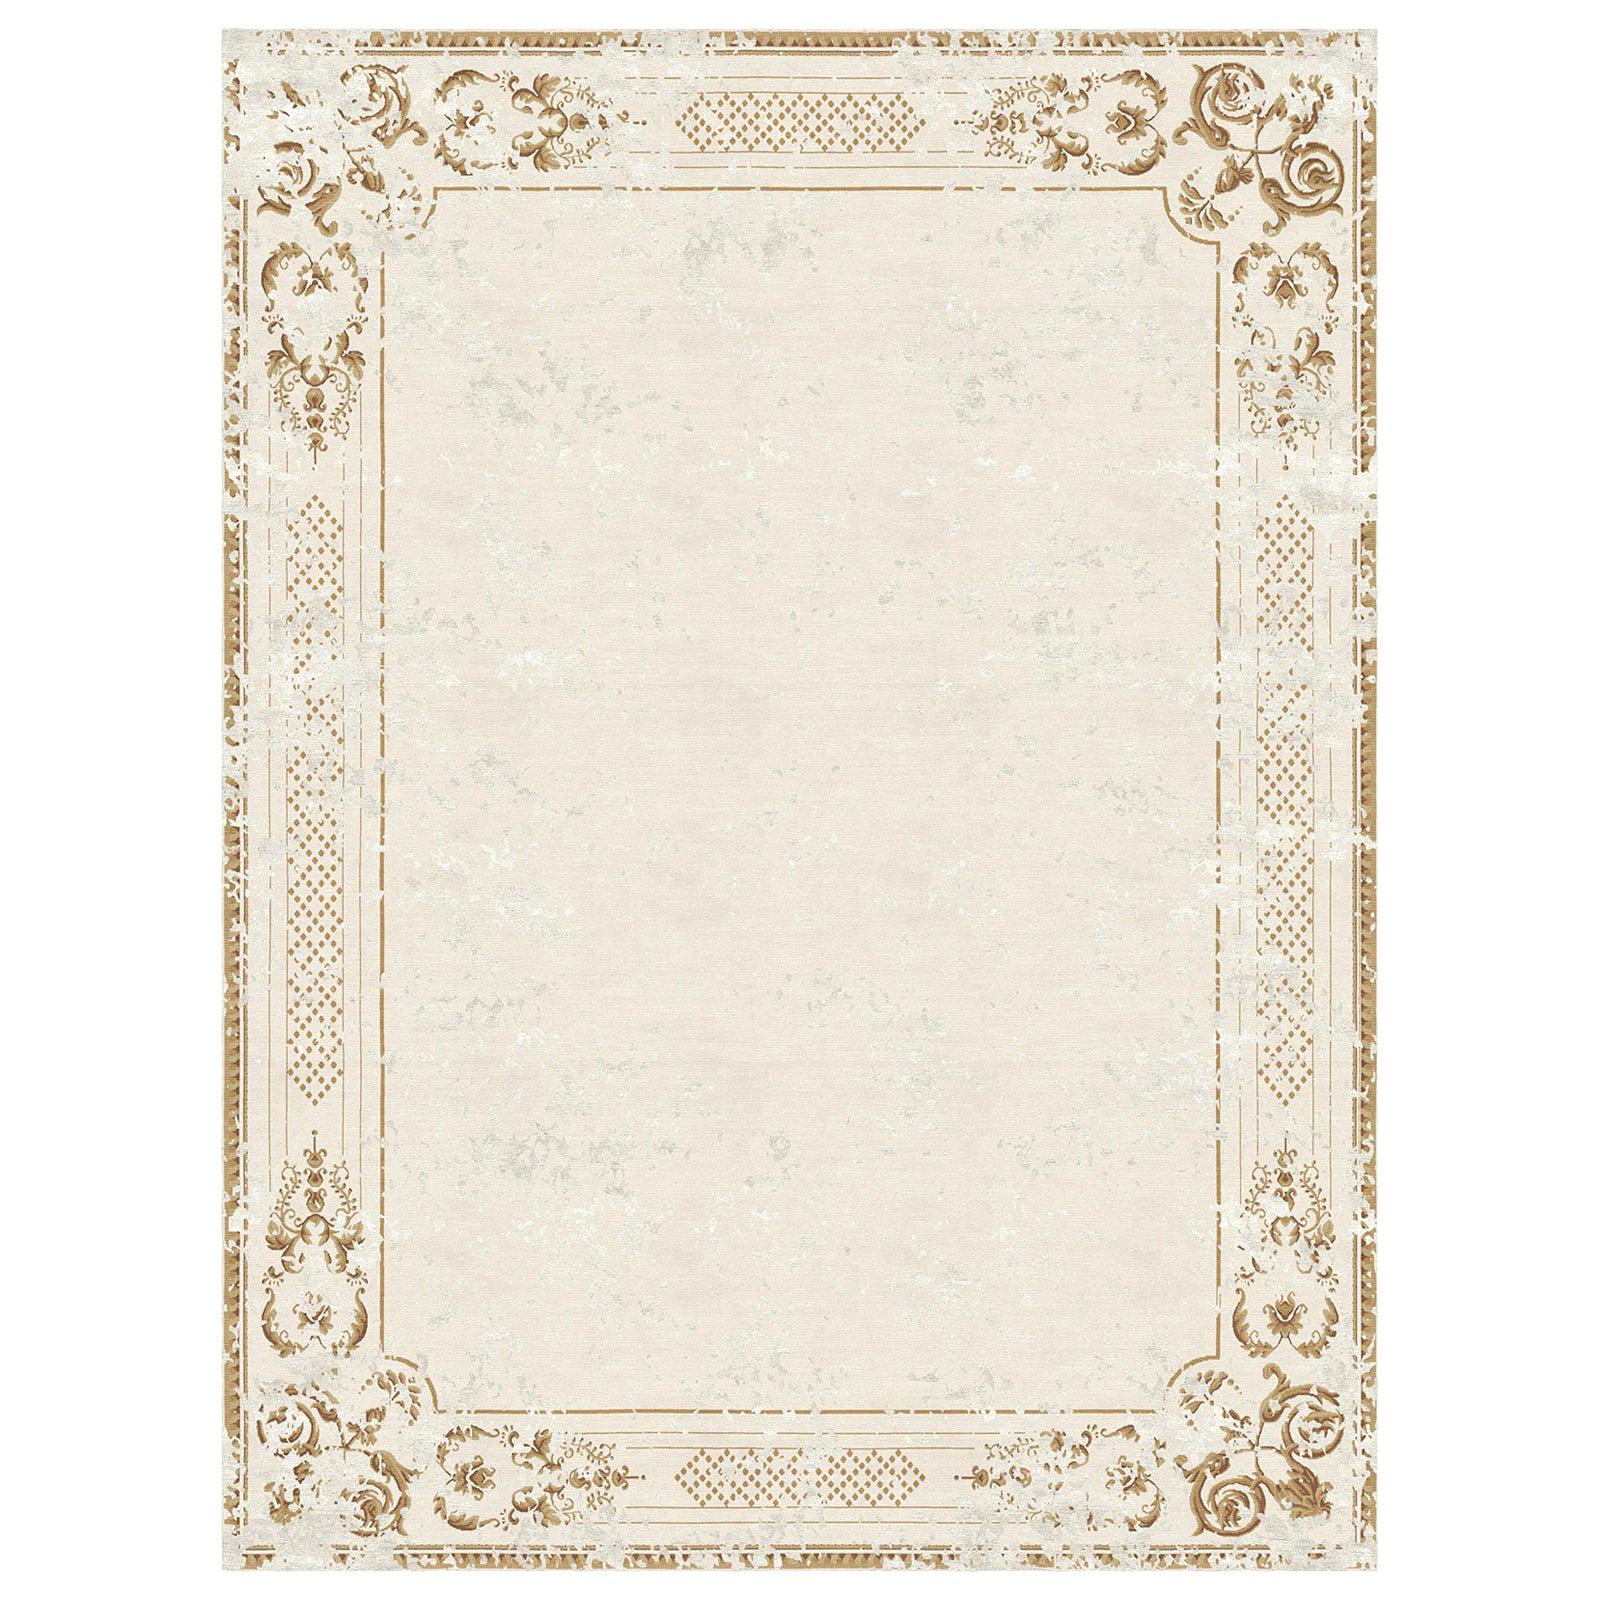 Modern classic beige rug Floral pattern - Ornate Stucco Antique White For Sale